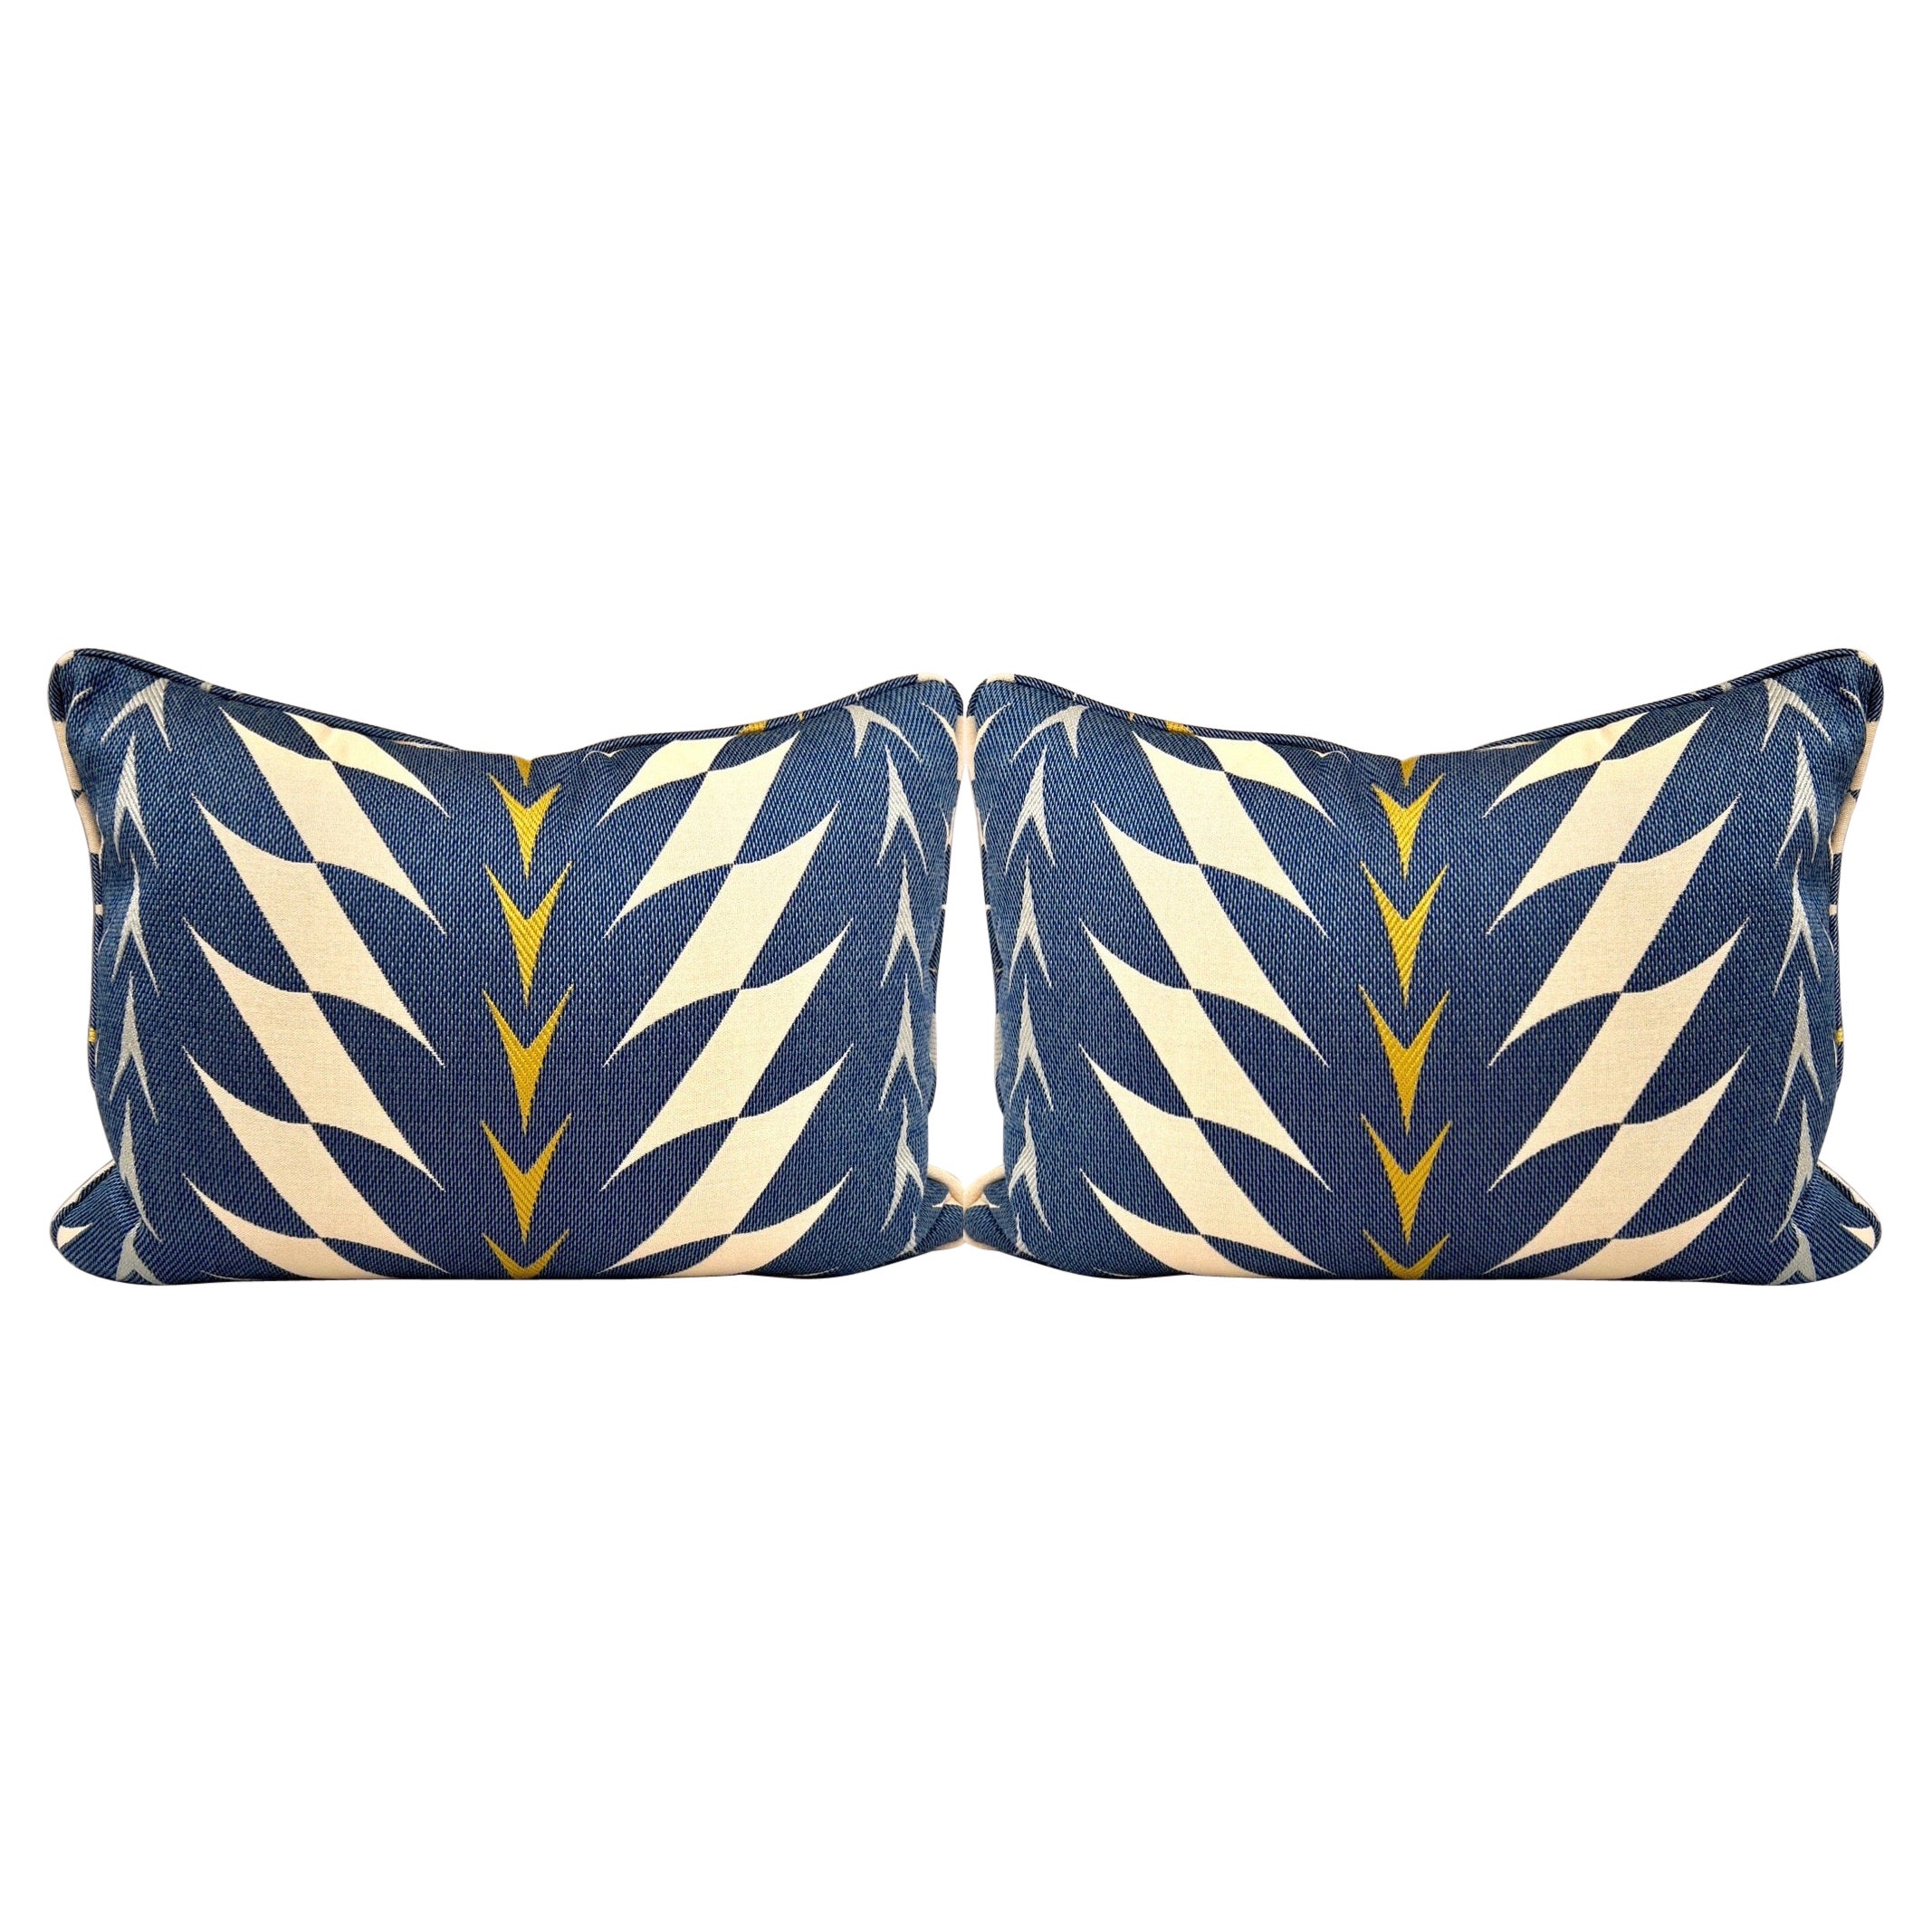 Pair of Blue and Yellow Woven Throw Pillows in Pierre Gonalons Fiori Textile 